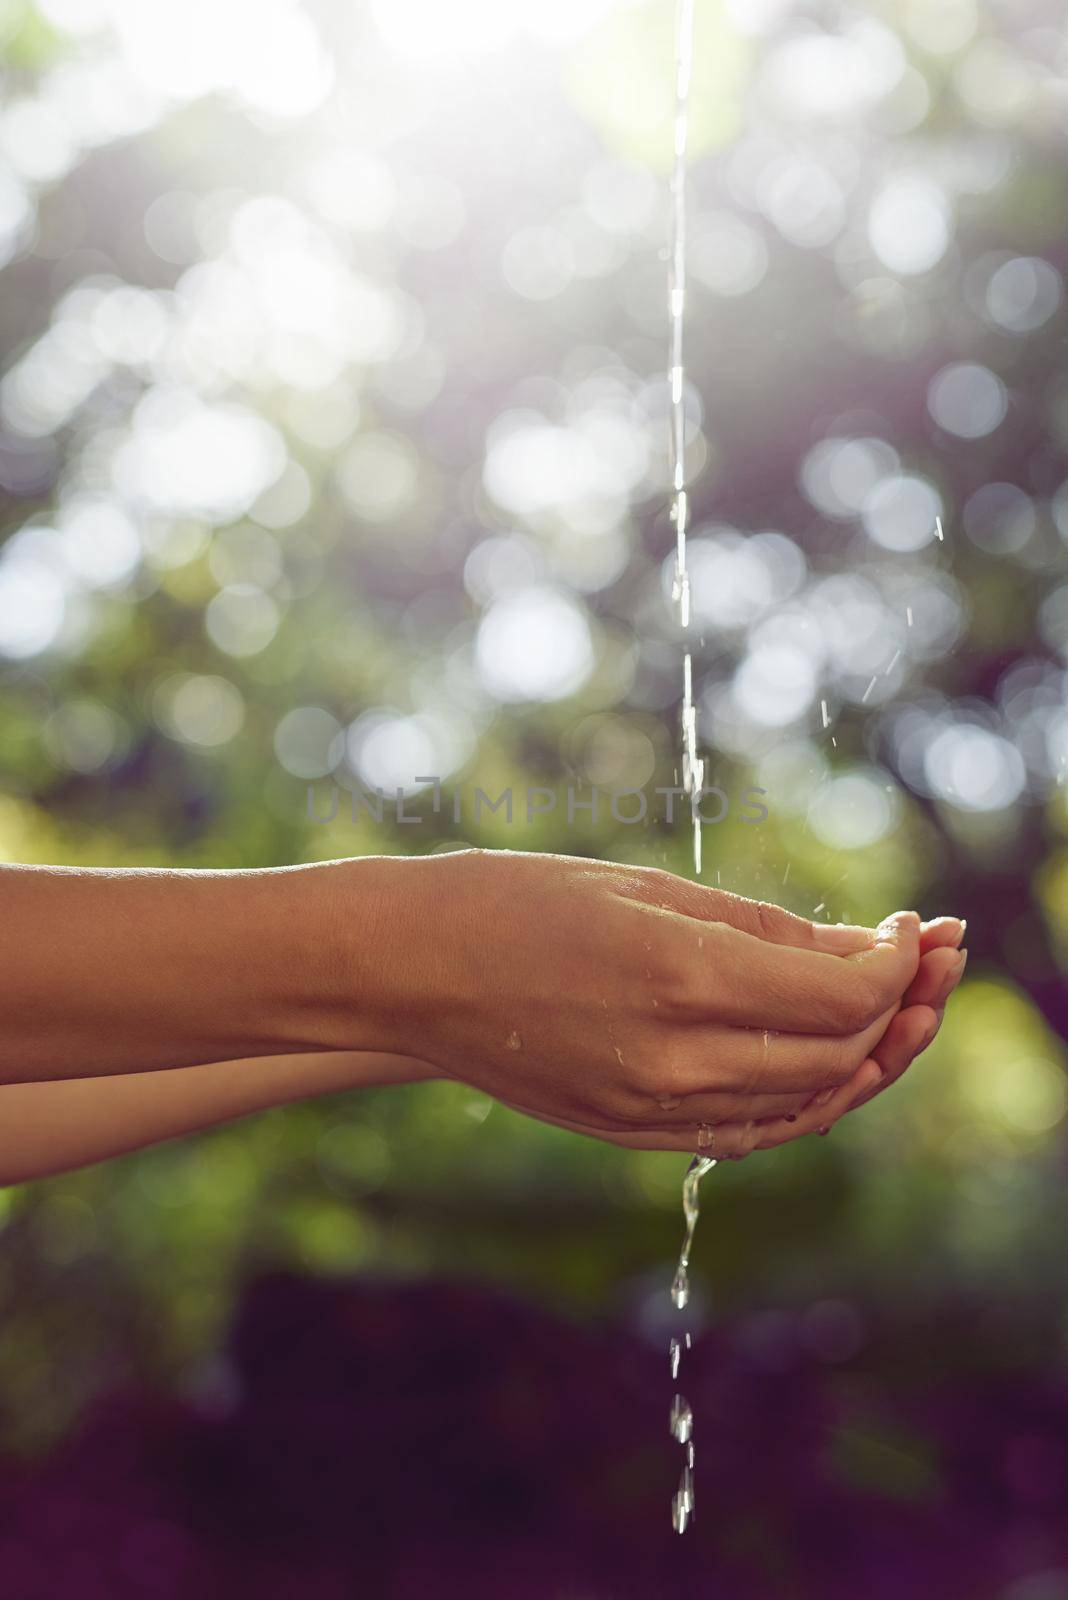 The source of all life. a woman washing her hands outdoors